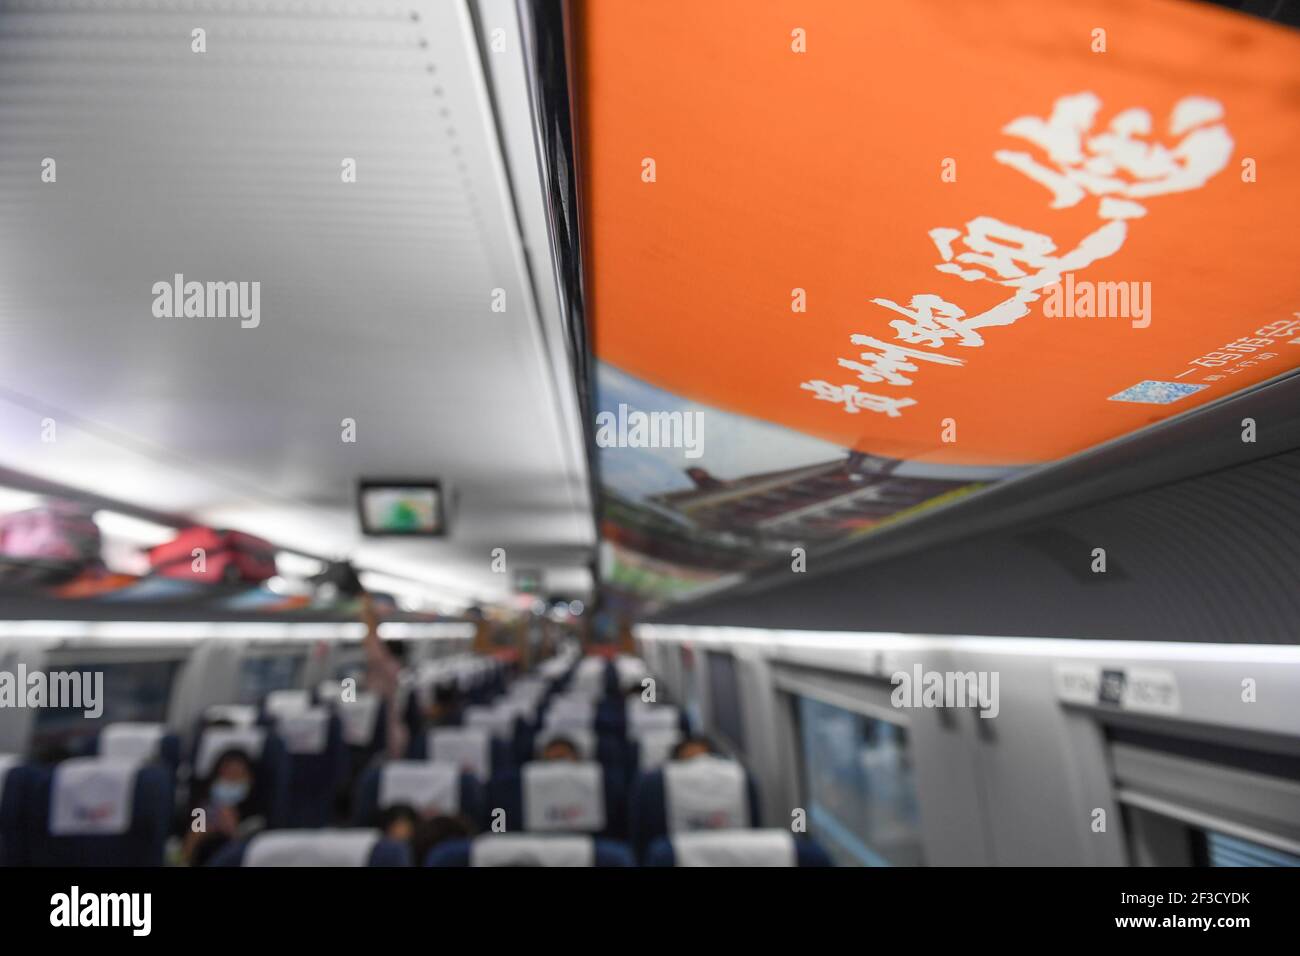 Shenzhen, China's Guangdong Province. 16th Mar, 2021. A sign that reads 'Welcome to Guizhou' is seen inside a high-speed passenger train car at the Shenzhen north railway station in Shenzhen, south China's Guangdong Province, March 16, 2021. High-speed passenger train No. G6022, officially dubbed 'Romantic Season of Blossoms in Colorful Guizhou,' set off from the Shenzhen north railway station on Tuesday. This move was to encourage residents in Shenzhen and Guizhou to visit the other place. Credit: Mao Siqian/Xinhua/Alamy Live News Stock Photo